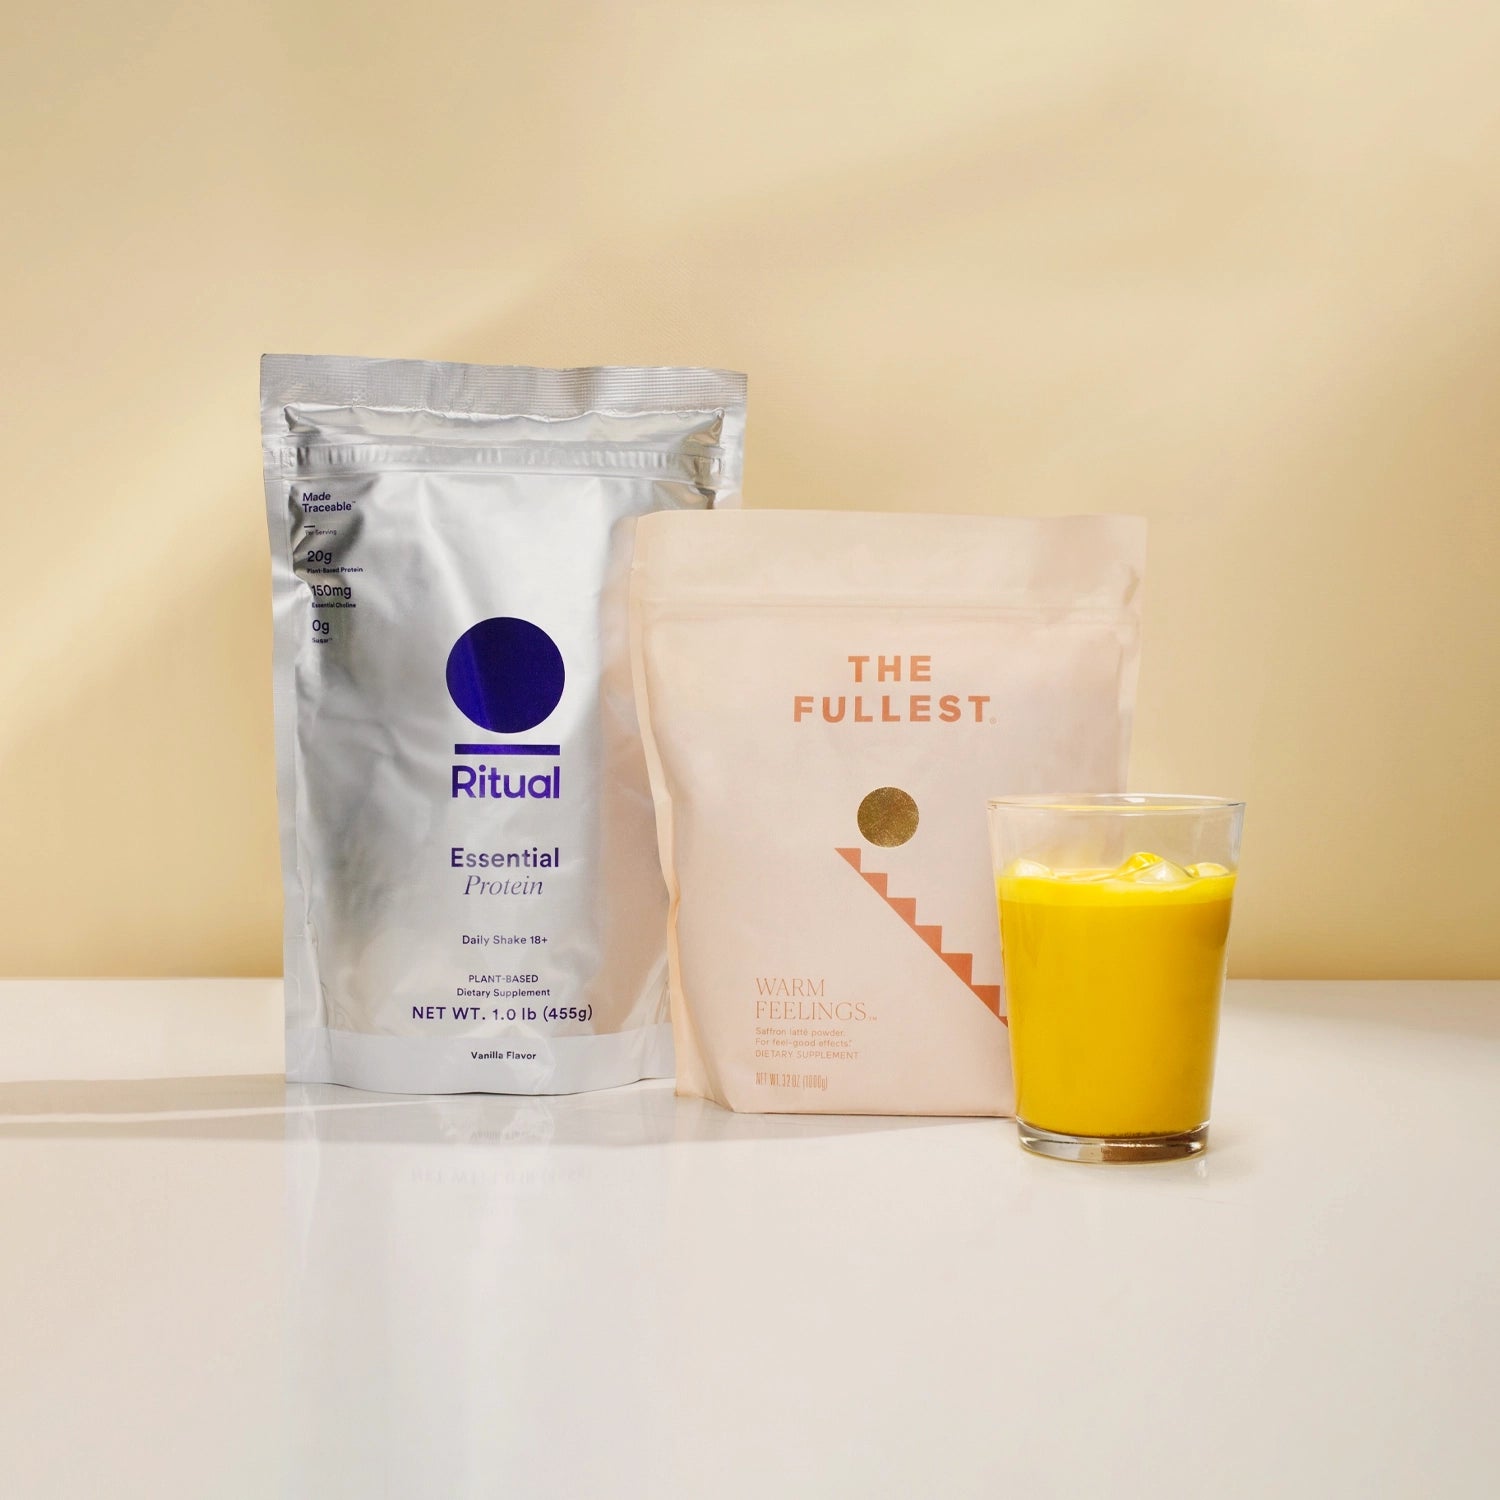 Two neatly standing pouches on a light surface against a soft yellow background. The left pouch is silver with a blue 'Ritual Essential Protein' label, and the right one is pink with 'THE FULLEST WARM FEELINGS' text.  Saffron beverage in front.